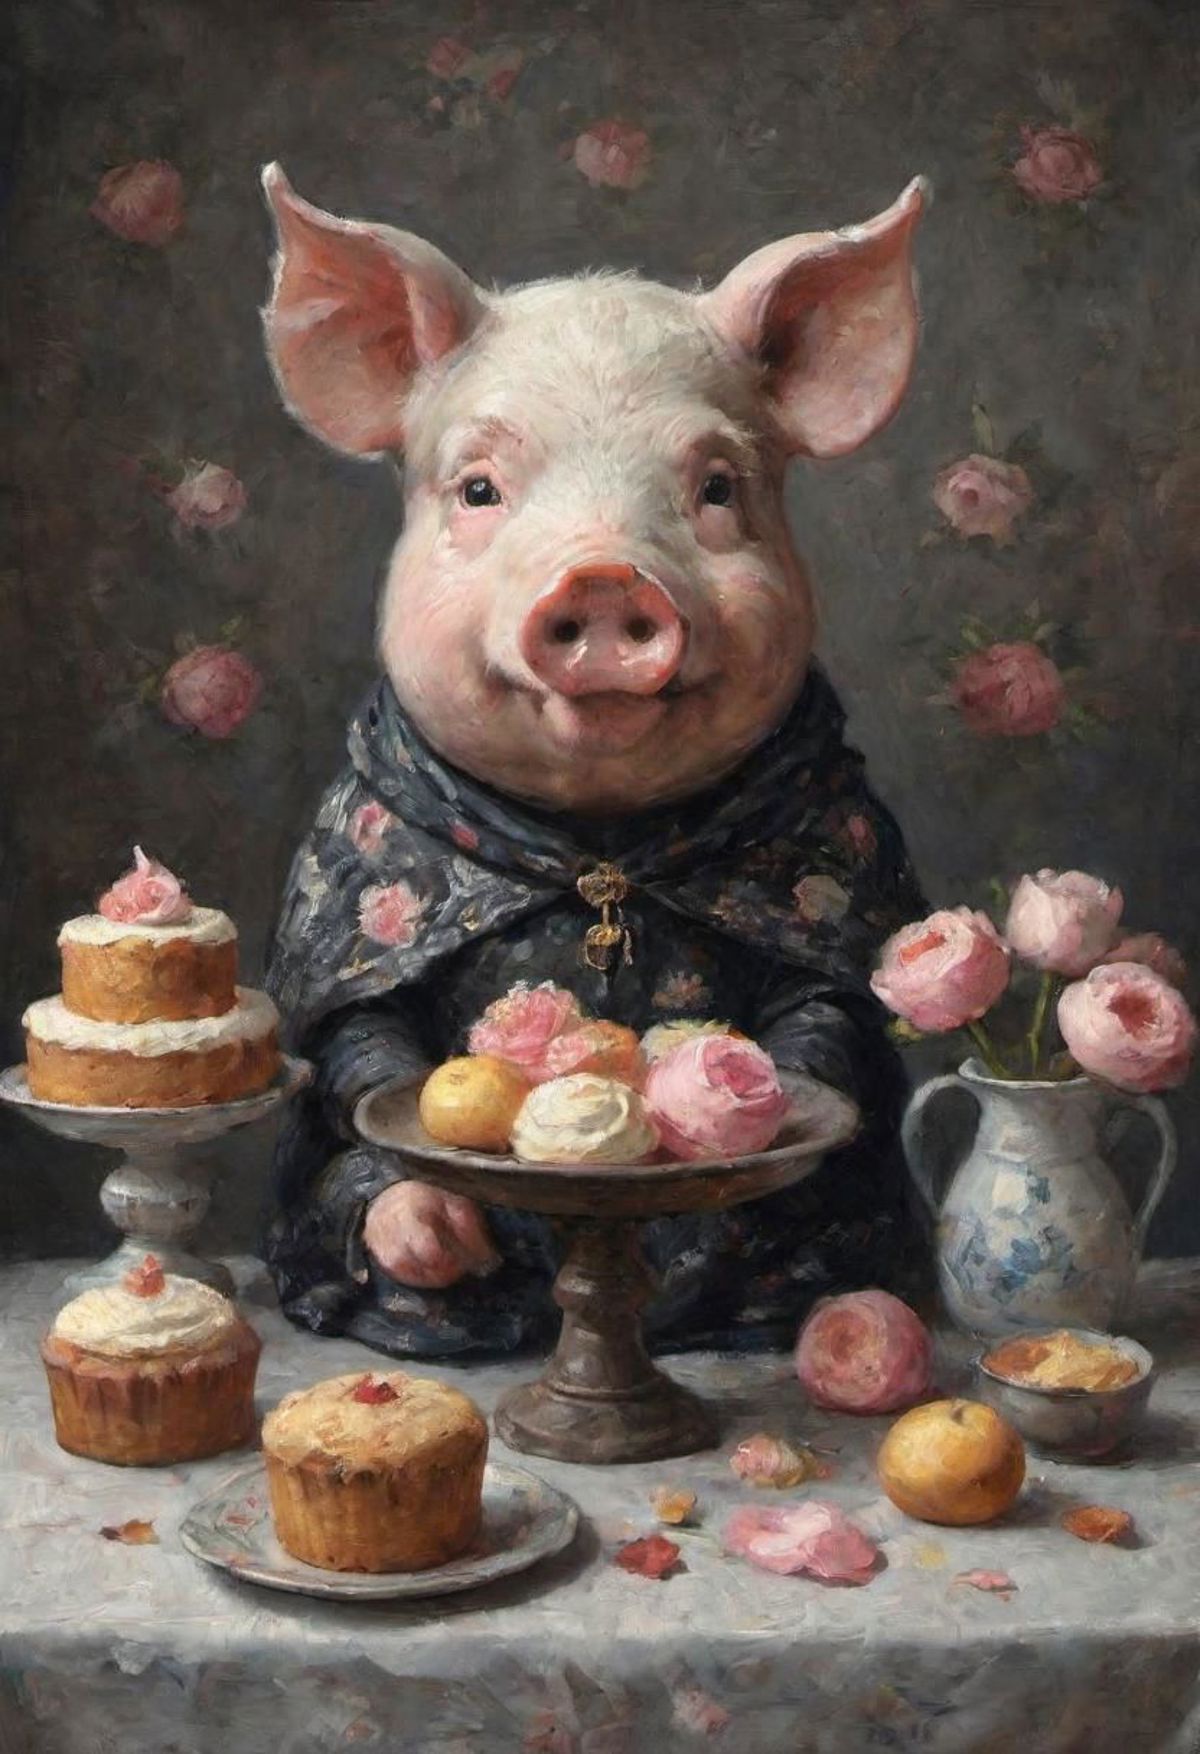 Artistic painting of a pig wearing a black dress and holding a tray of cakes and pastries.